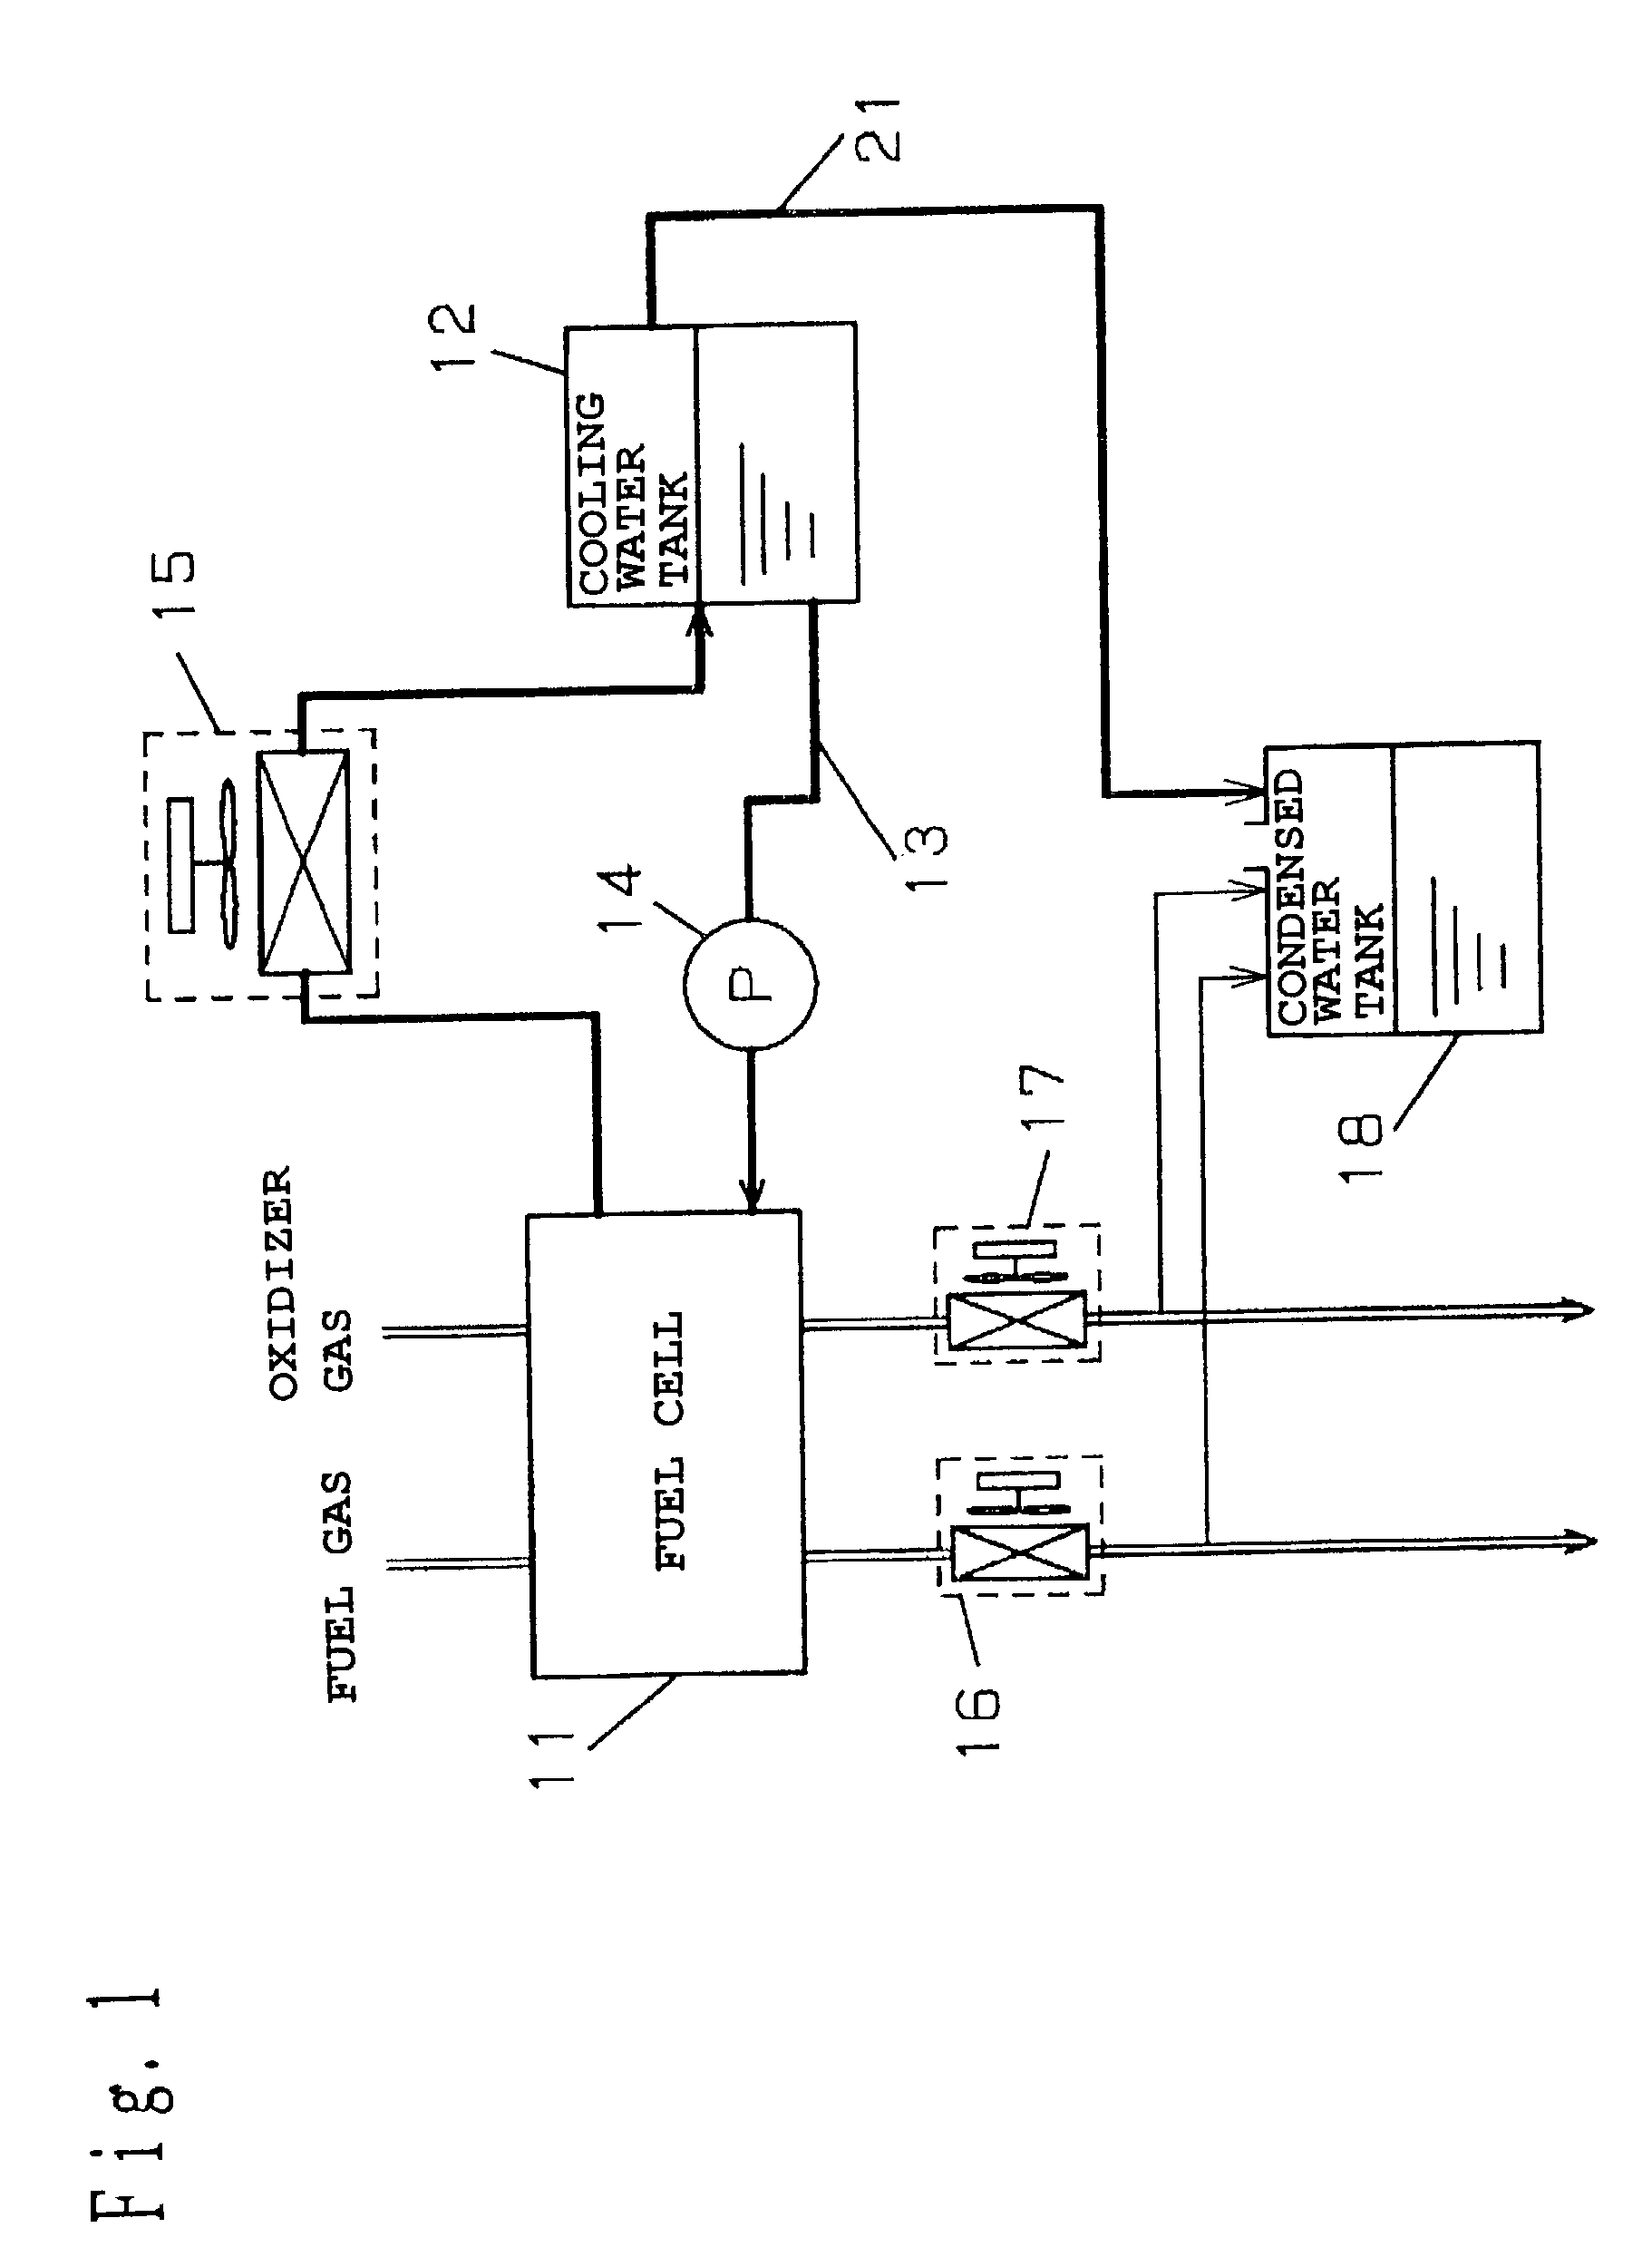 Fuel cell system and operation method having a condensed water tank open to atmosphere